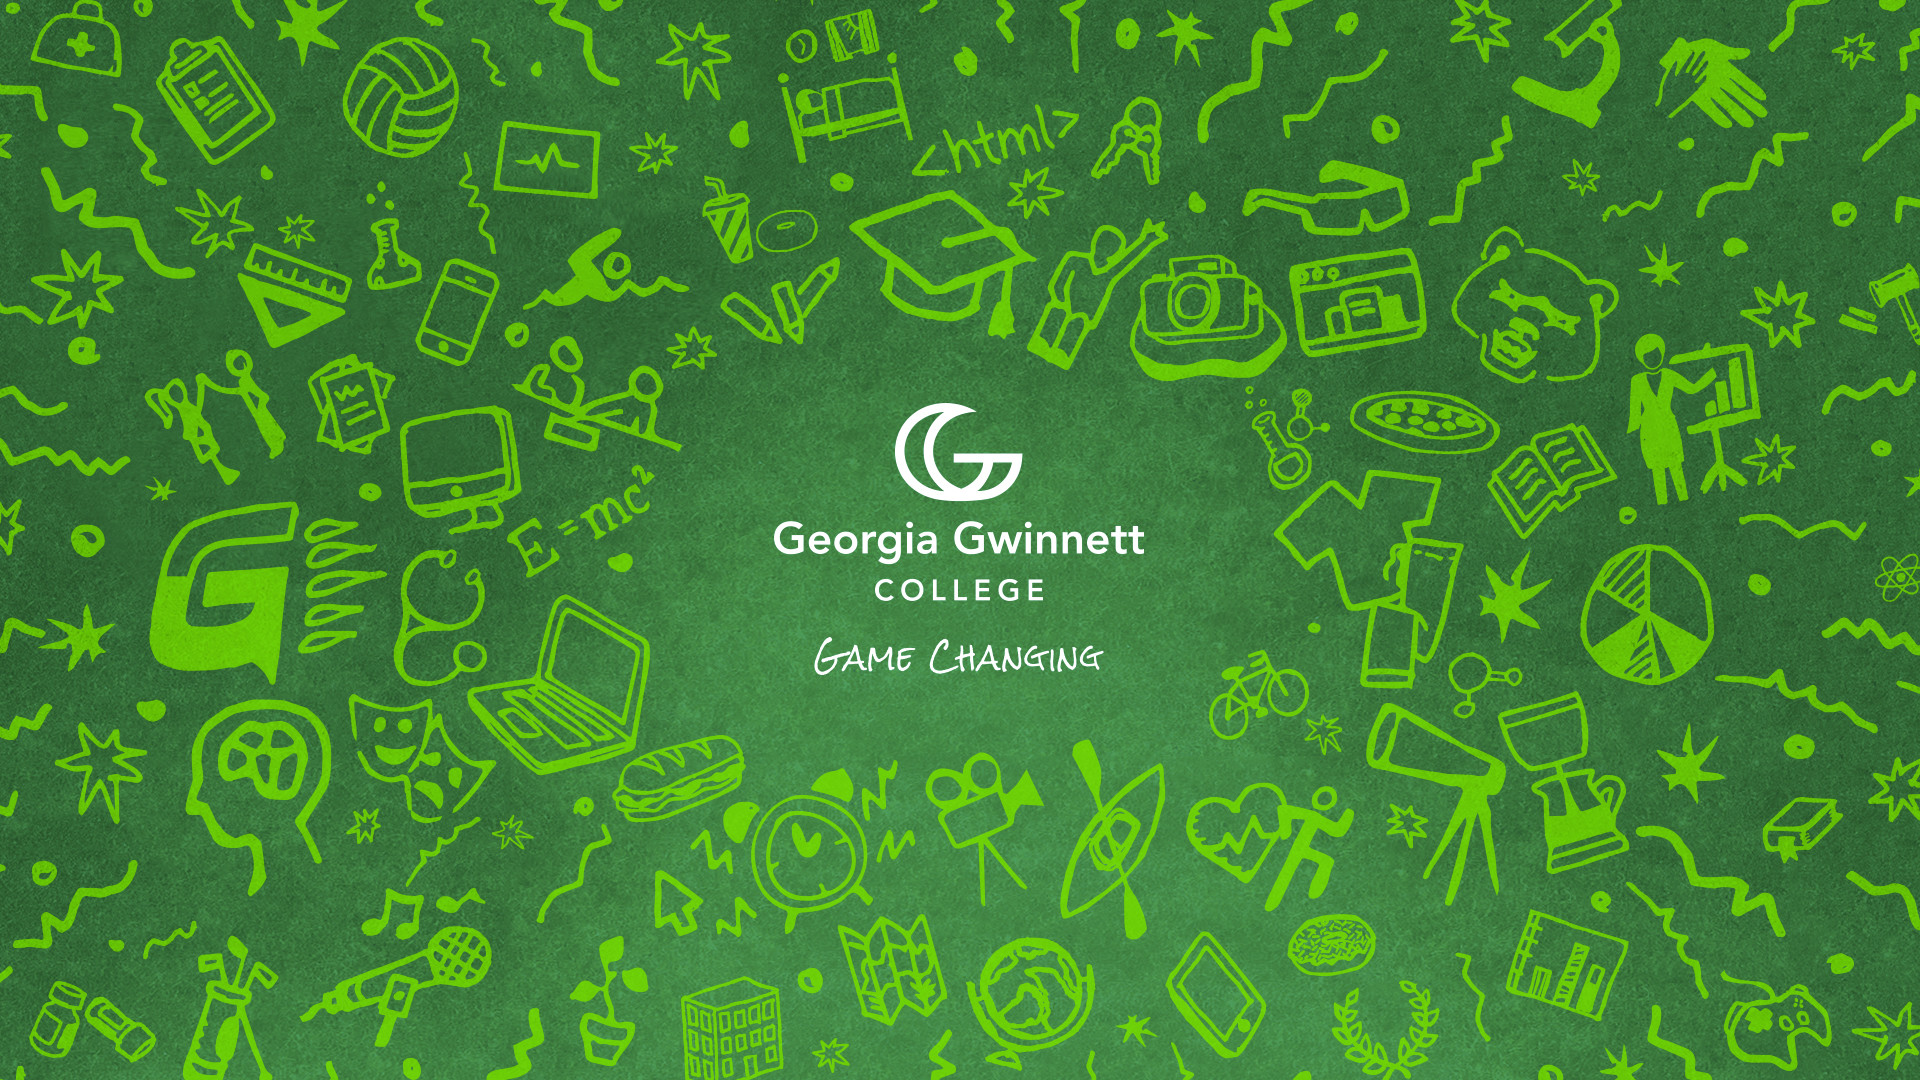 1920x1080 Georgia Gwinnett College Game Changing on dark green background surrounded  by doodles